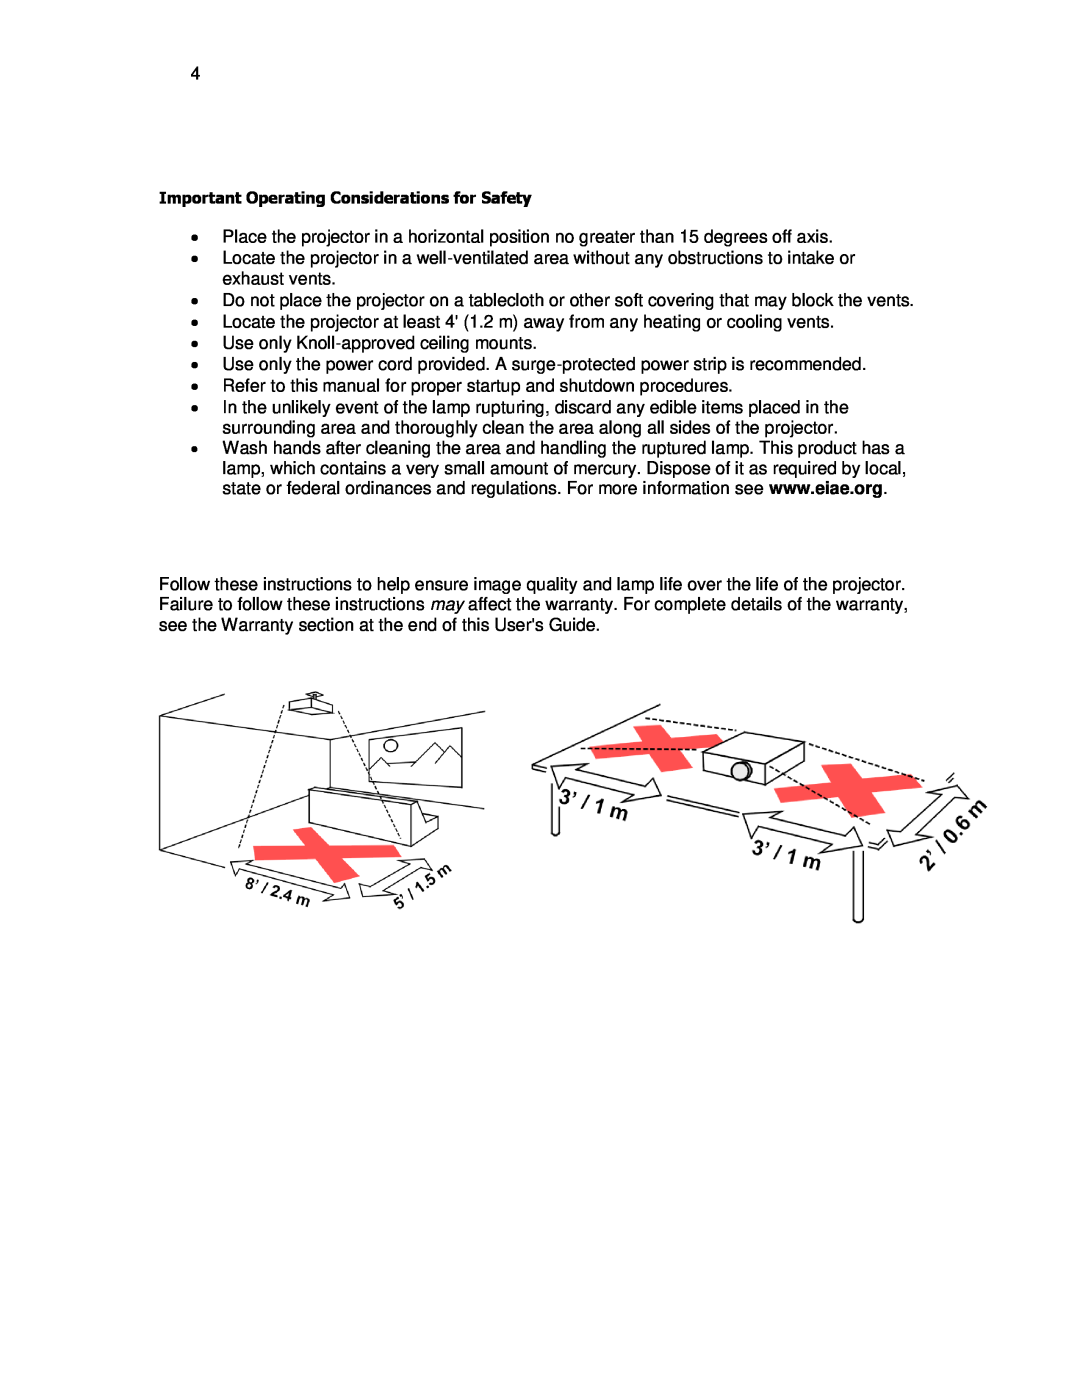 Knoll Systems HD108, HD290, HD178 user manual ∙ Use only Knoll-approved ceiling mounts 